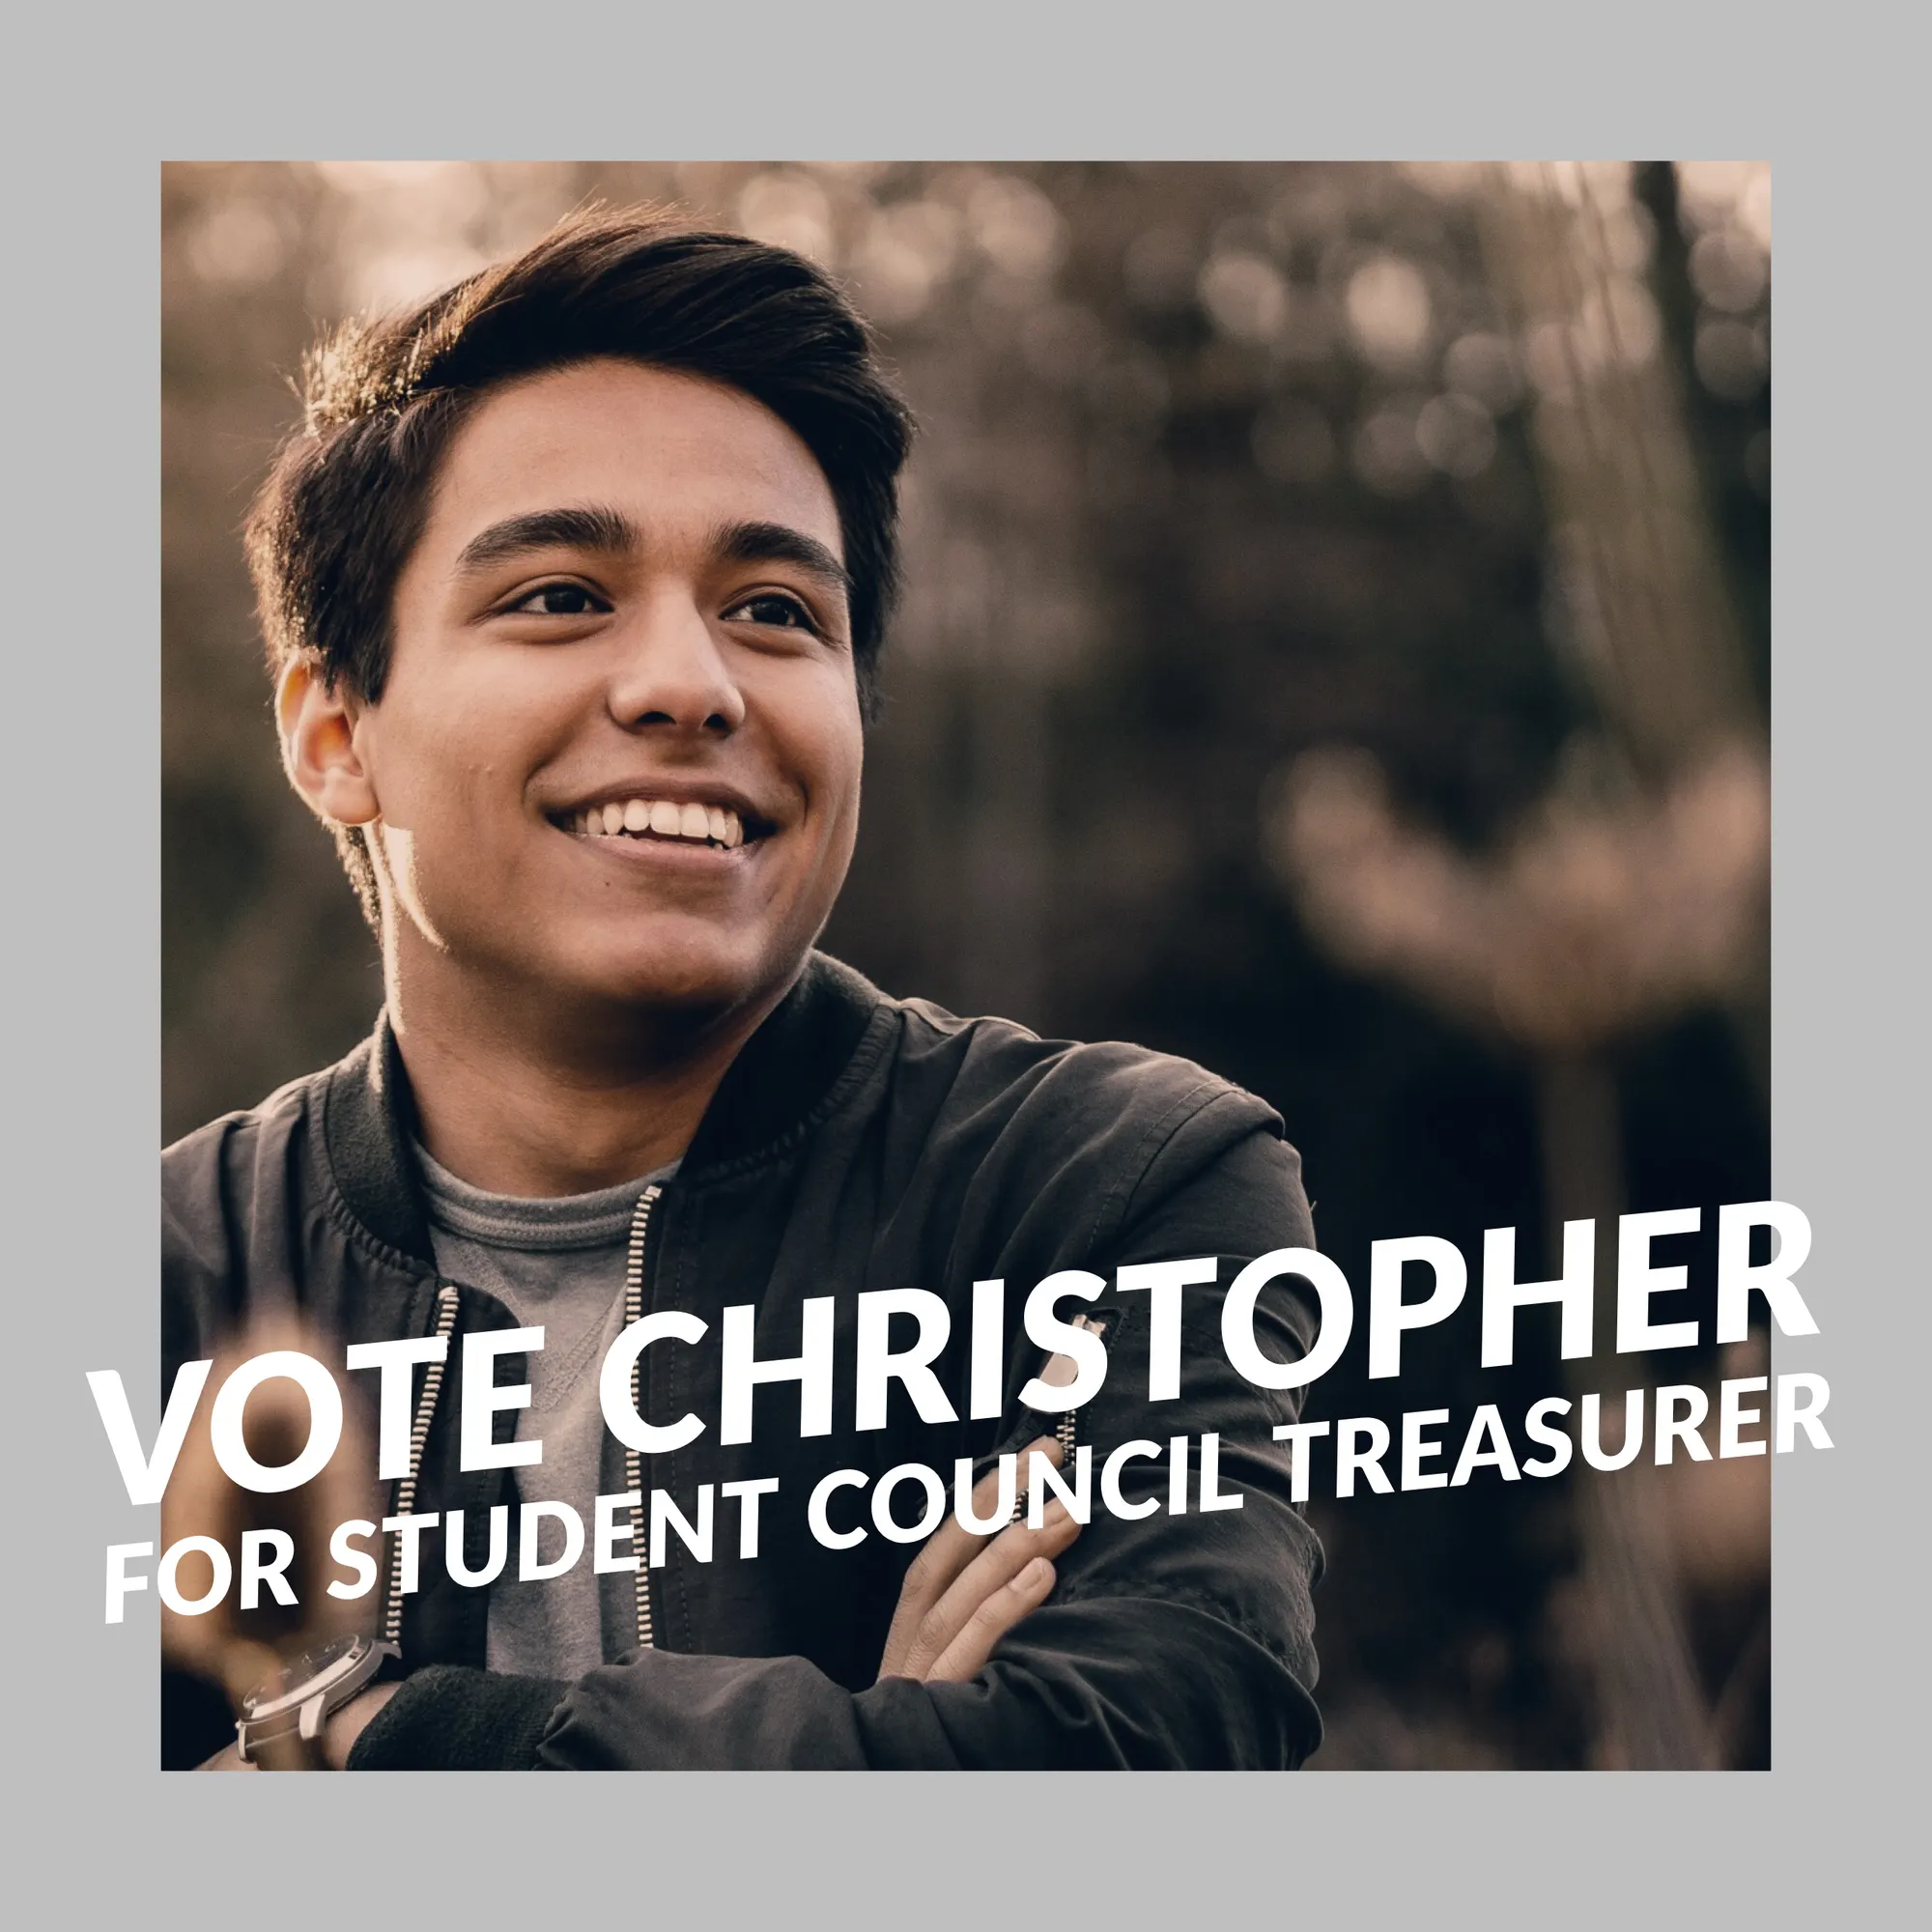 Grey Toned Student Council Candidate Portrait Instagram Post